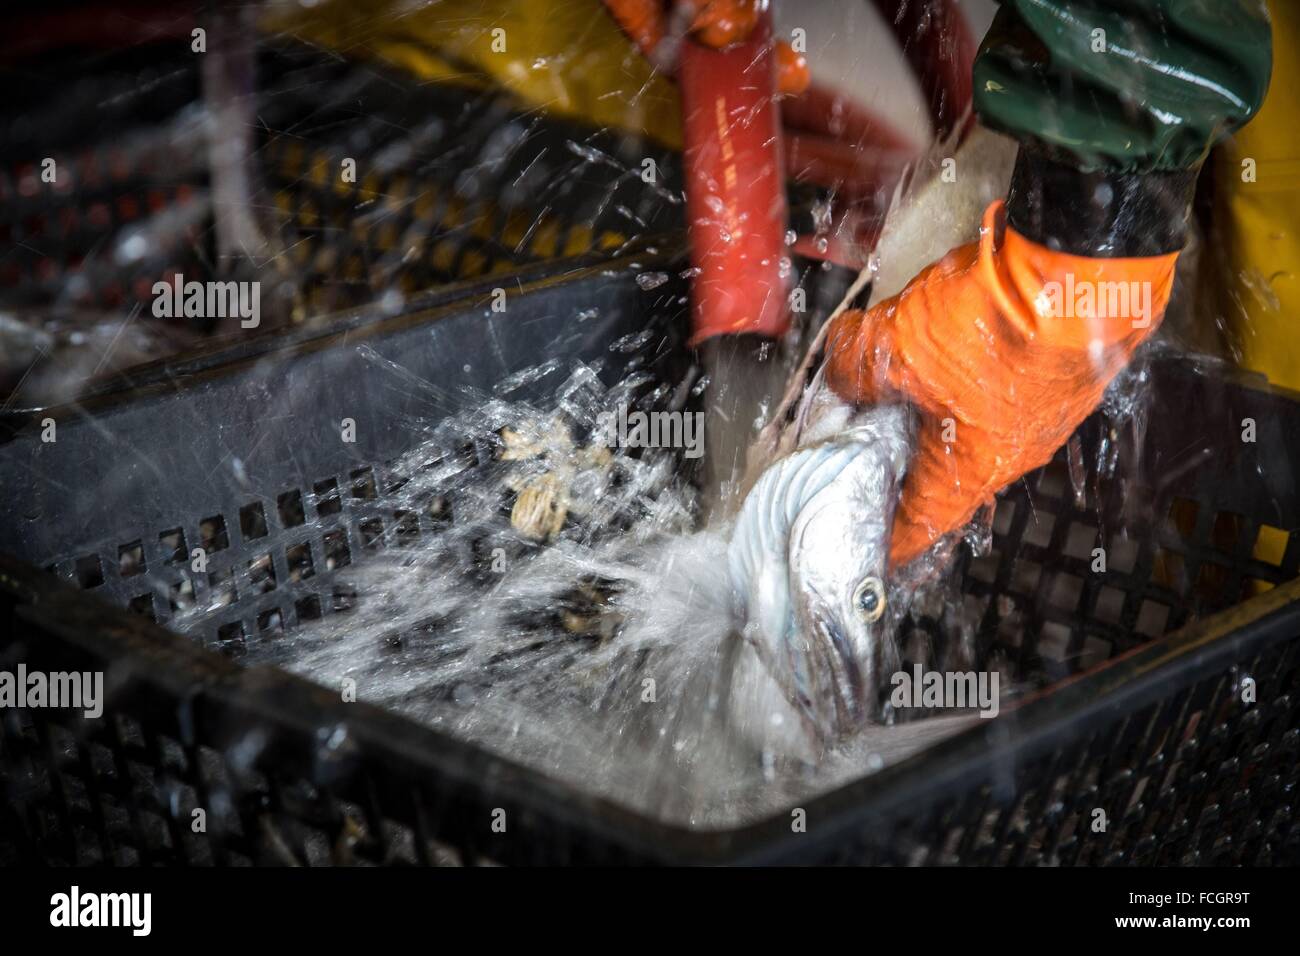 SLUICING DOWN OF THE FISH (YOUNG HAKE), SEA FISHING ON THE SHRIMP TRAWLER 'QUENTIN-GREGOIRE' OFF THE COAST OF SABLES-D'OLONNE (8 Stock Photo